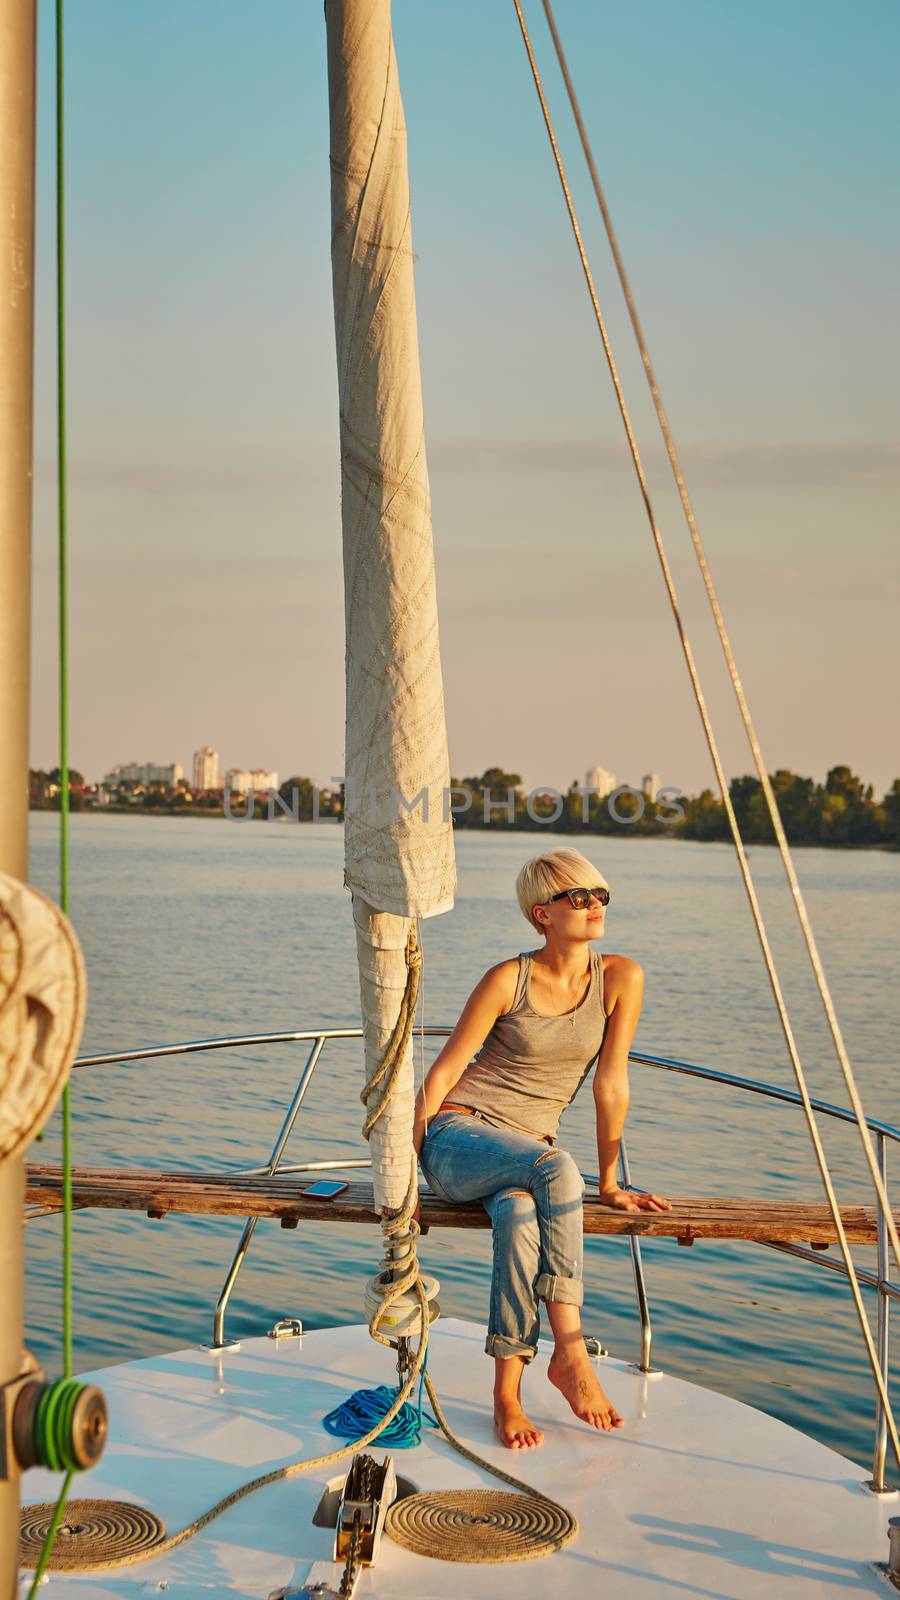 Woman traveling by boat at sunset by sarymsakov